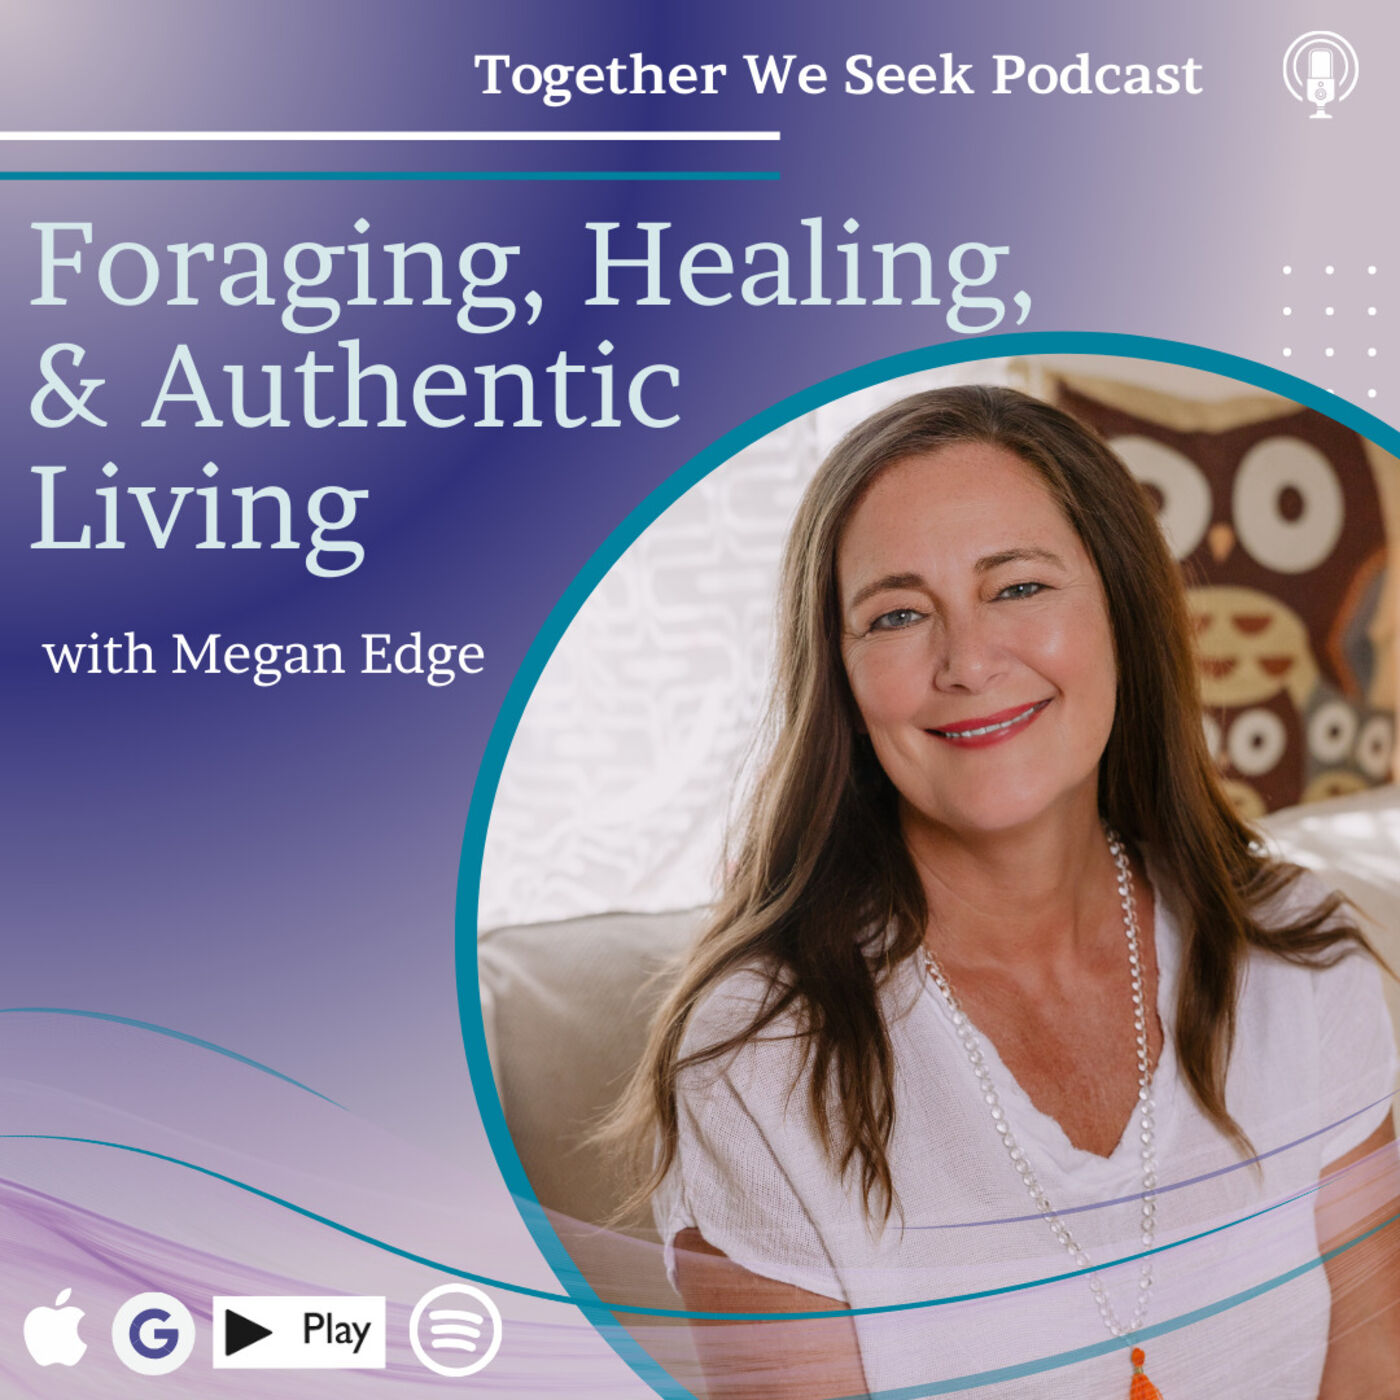 Foraging, Healing, and Authentic Living with Megan Edge